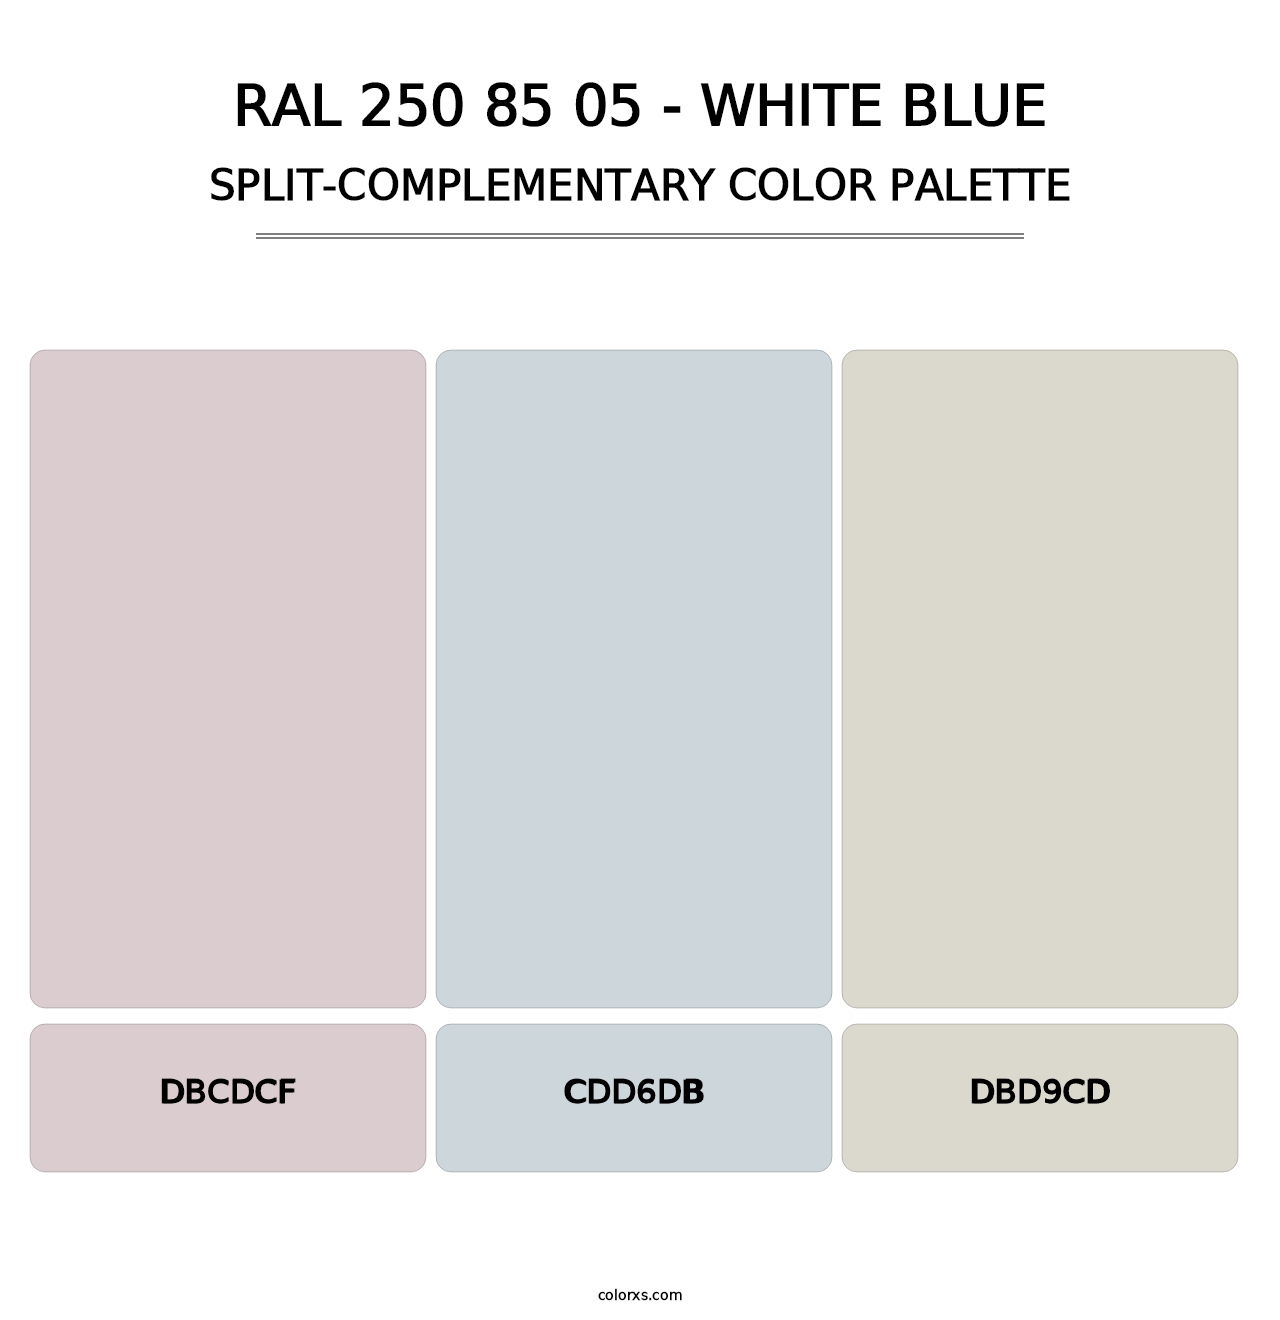 RAL 250 85 05 - White Blue - Split-Complementary Color Palette